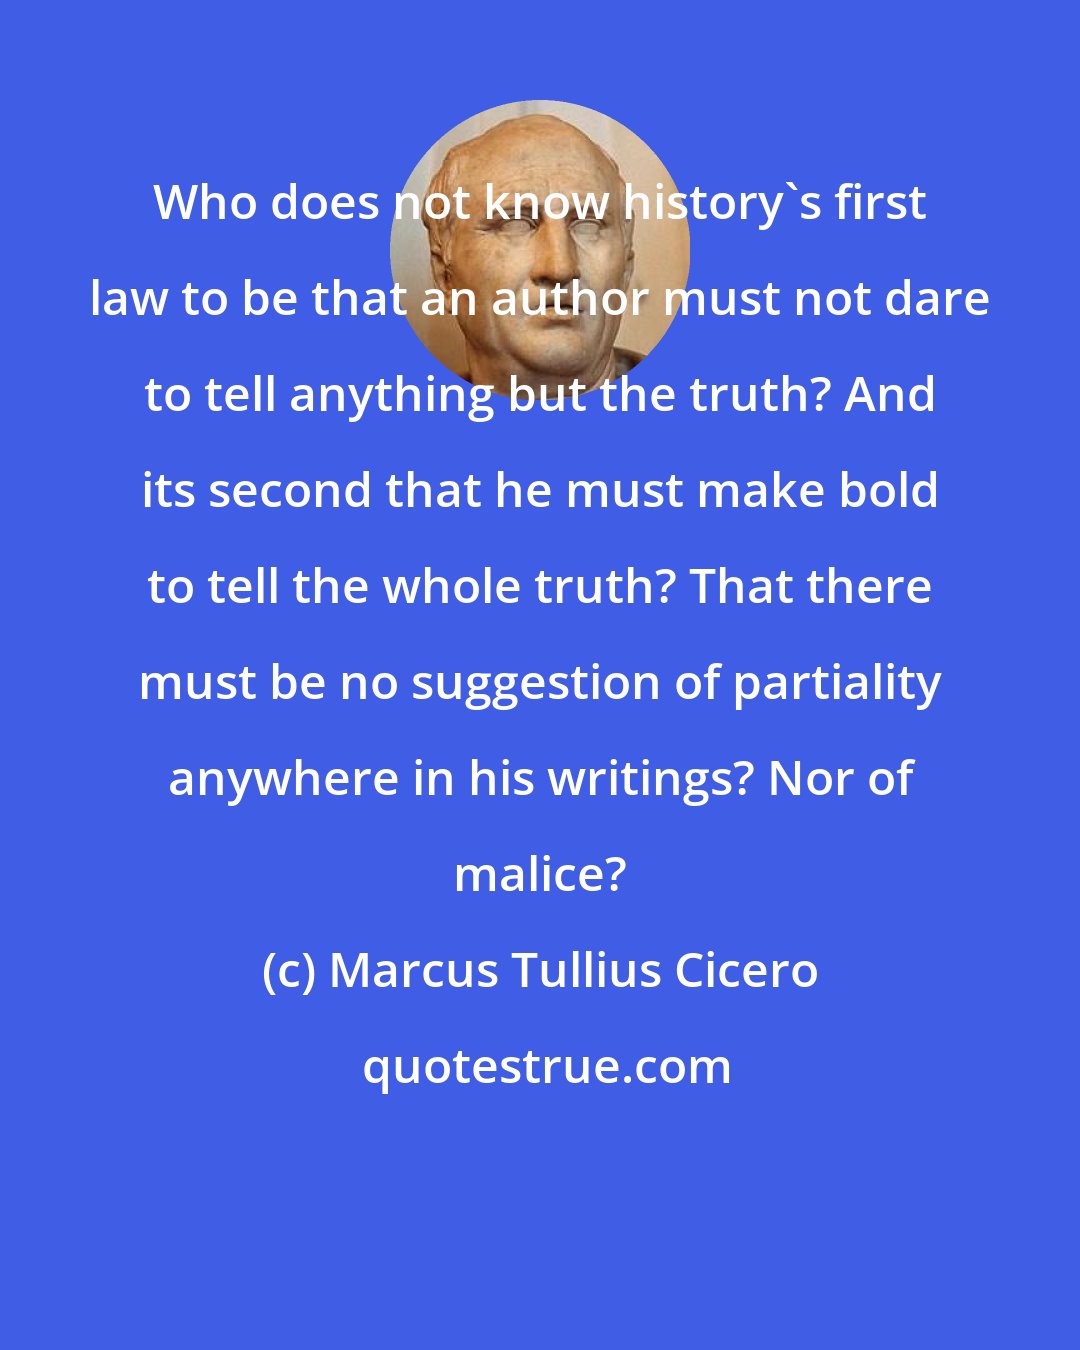 Marcus Tullius Cicero: Who does not know history's first law to be that an author must not dare to tell anything but the truth? And its second that he must make bold to tell the whole truth? That there must be no suggestion of partiality anywhere in his writings? Nor of malice?